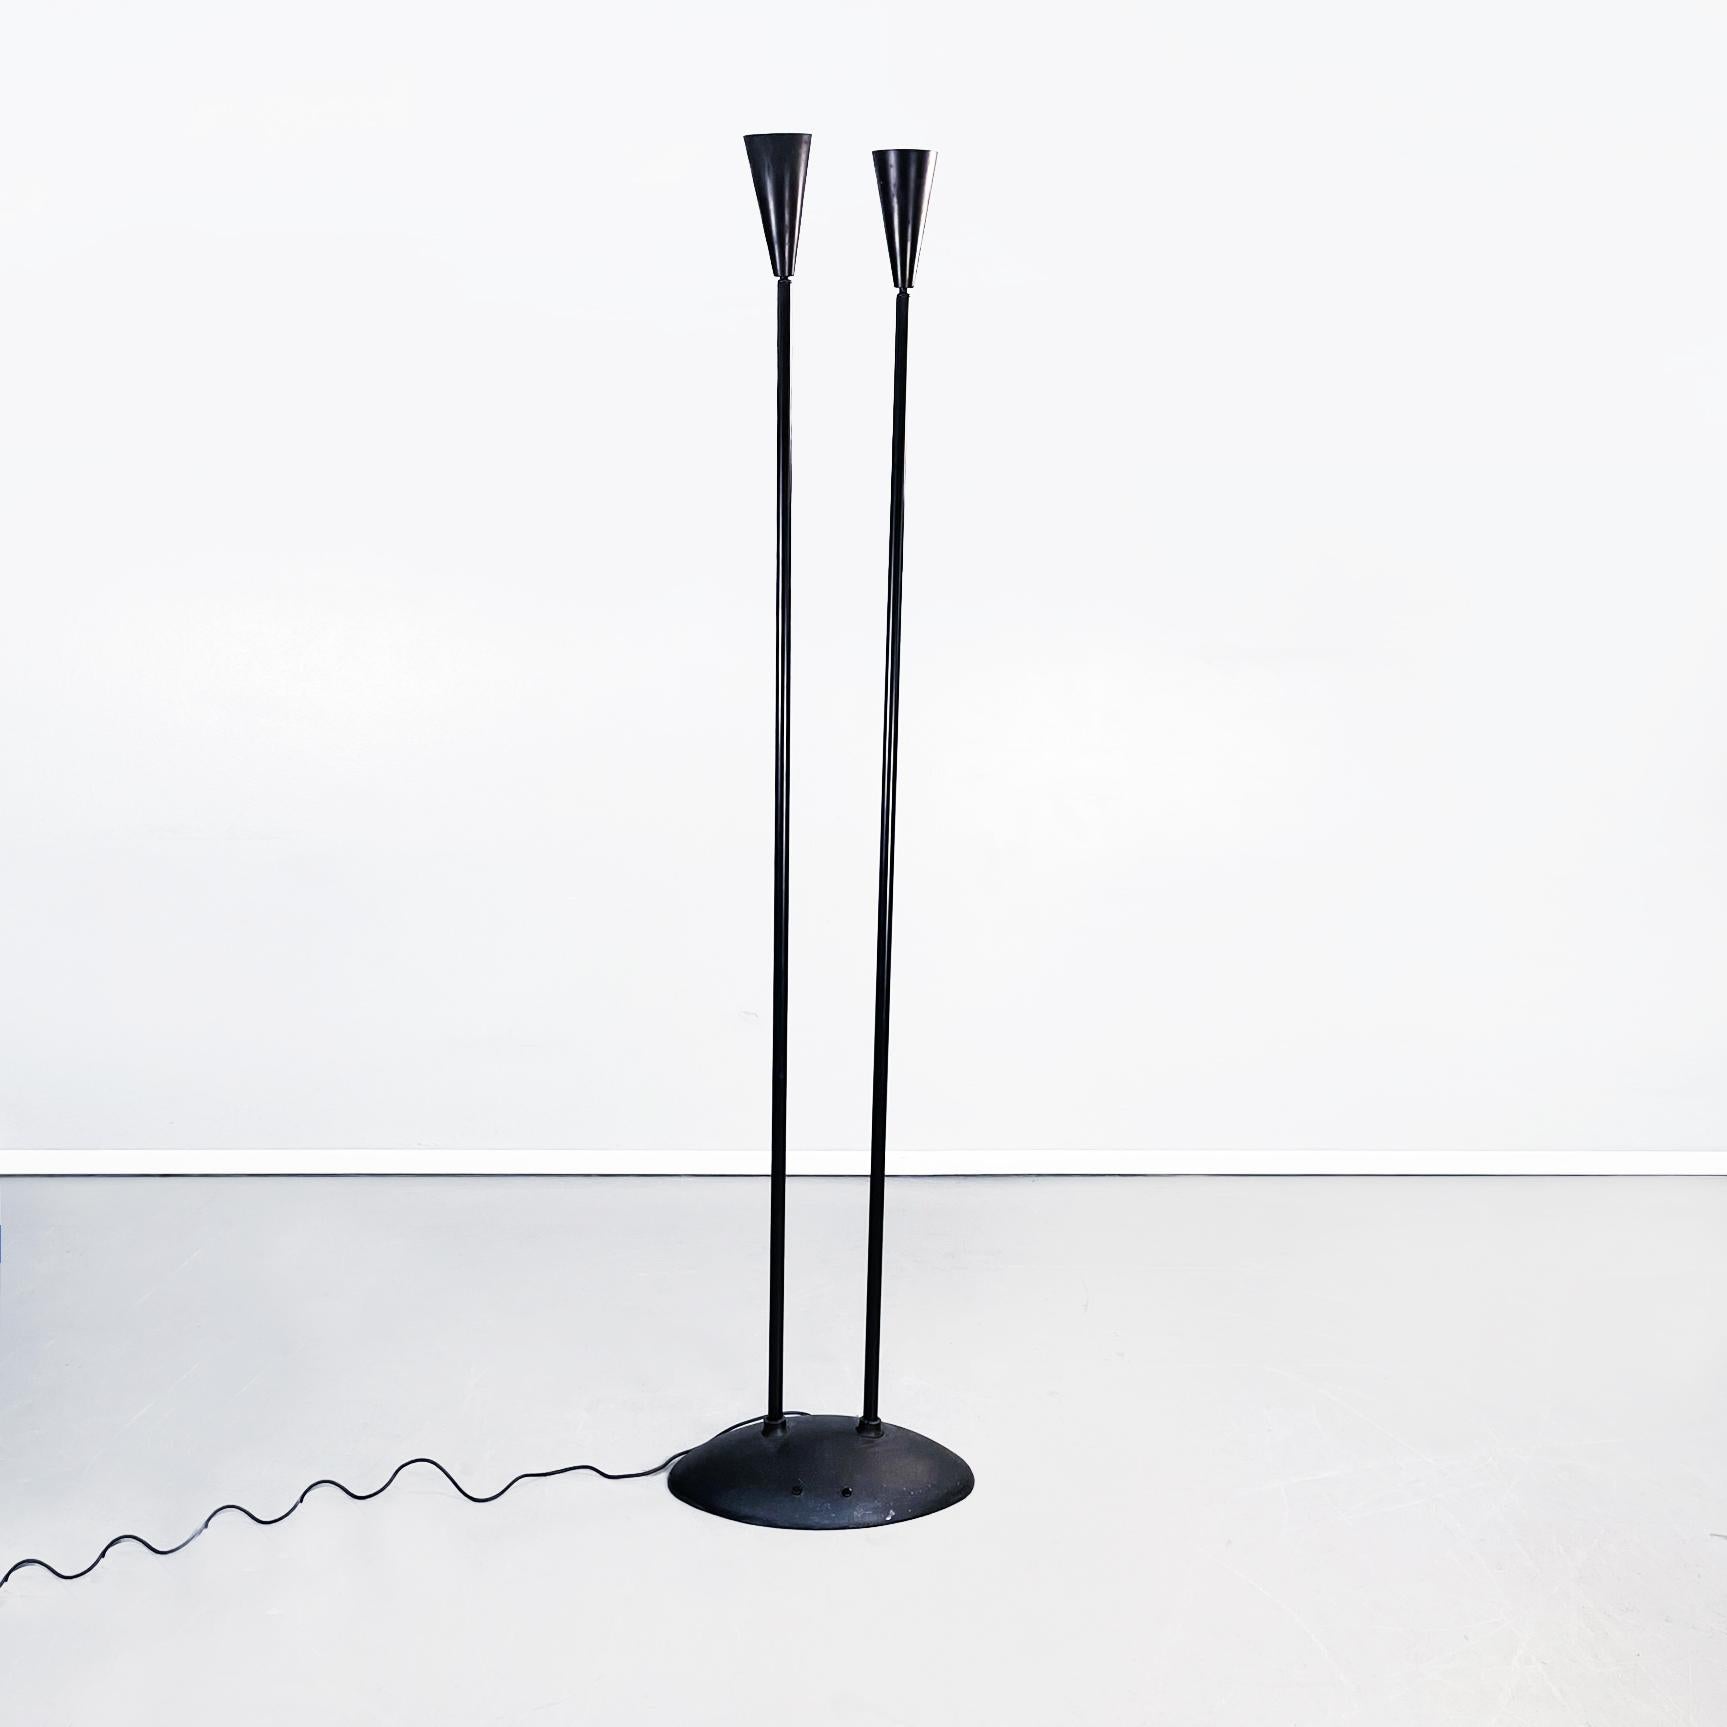 Italian modern Floor lamp whit two light adjustable in black metal, 1990s.
Floor lamp with oval base in black painted metal. It has two adjustable conical lampshades, which allow diffused upward lighting. The central structure has a double stems.